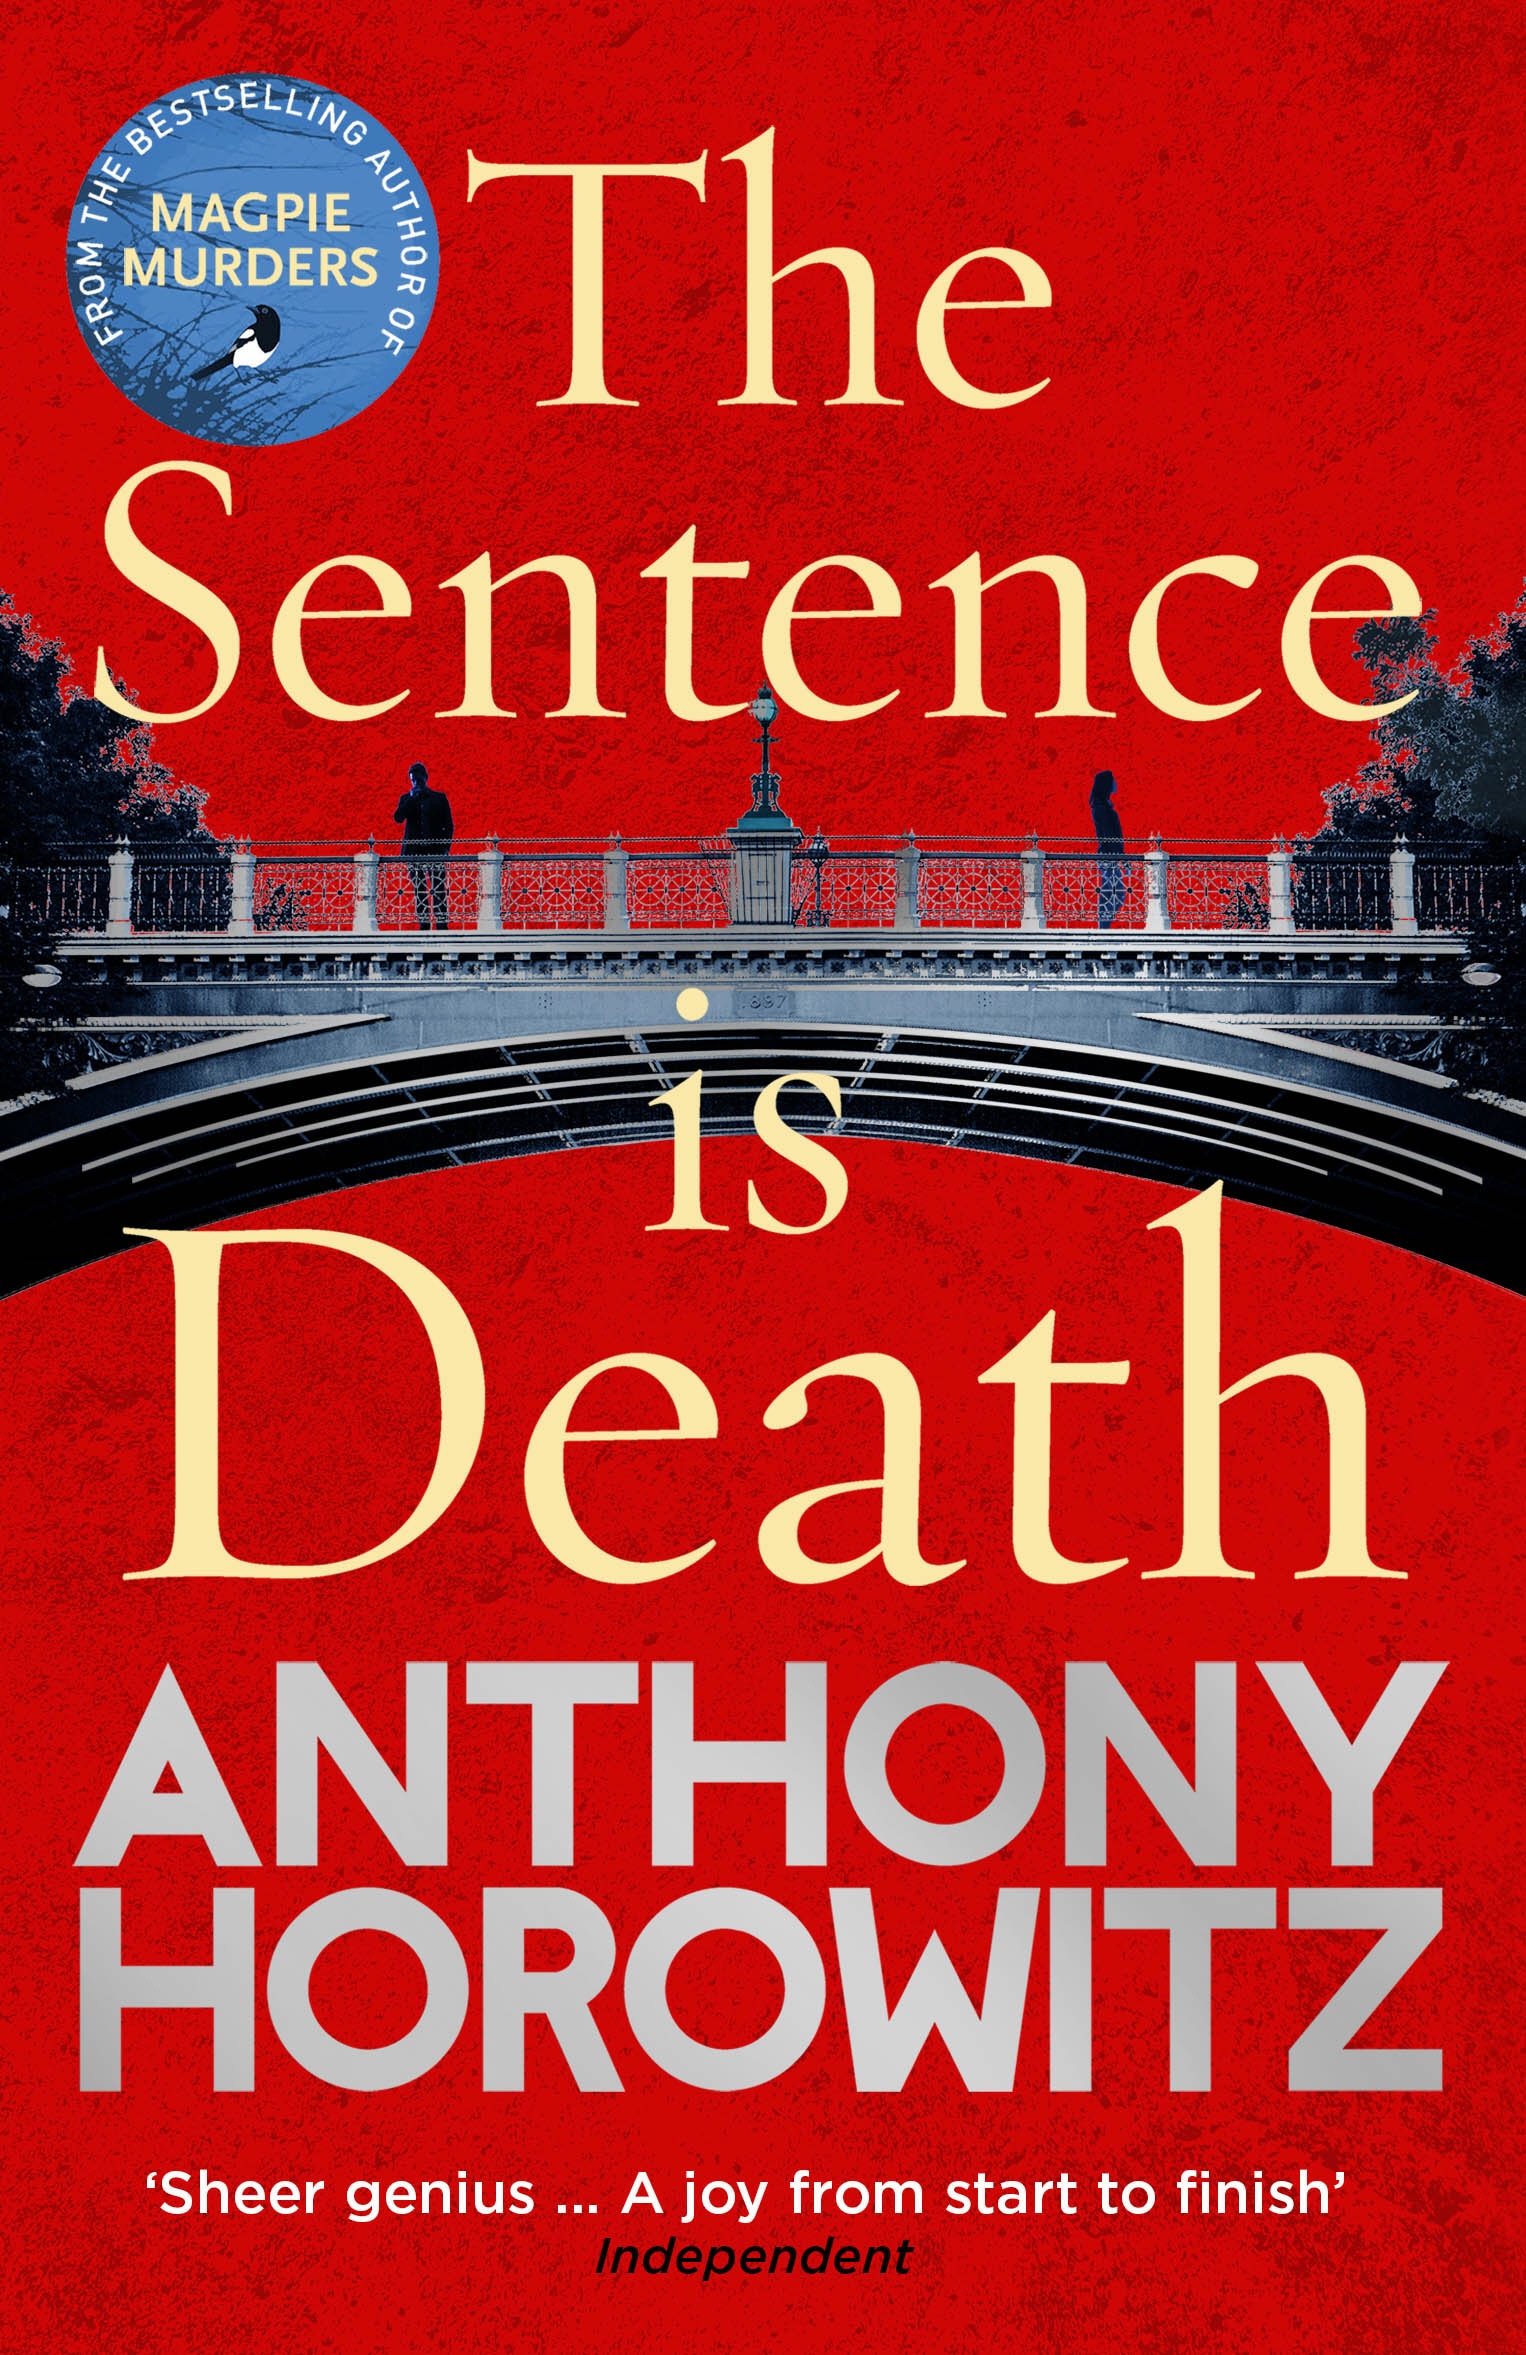 Book “The Sentence is Death” by Anthony Horowitz — September 24, 2019